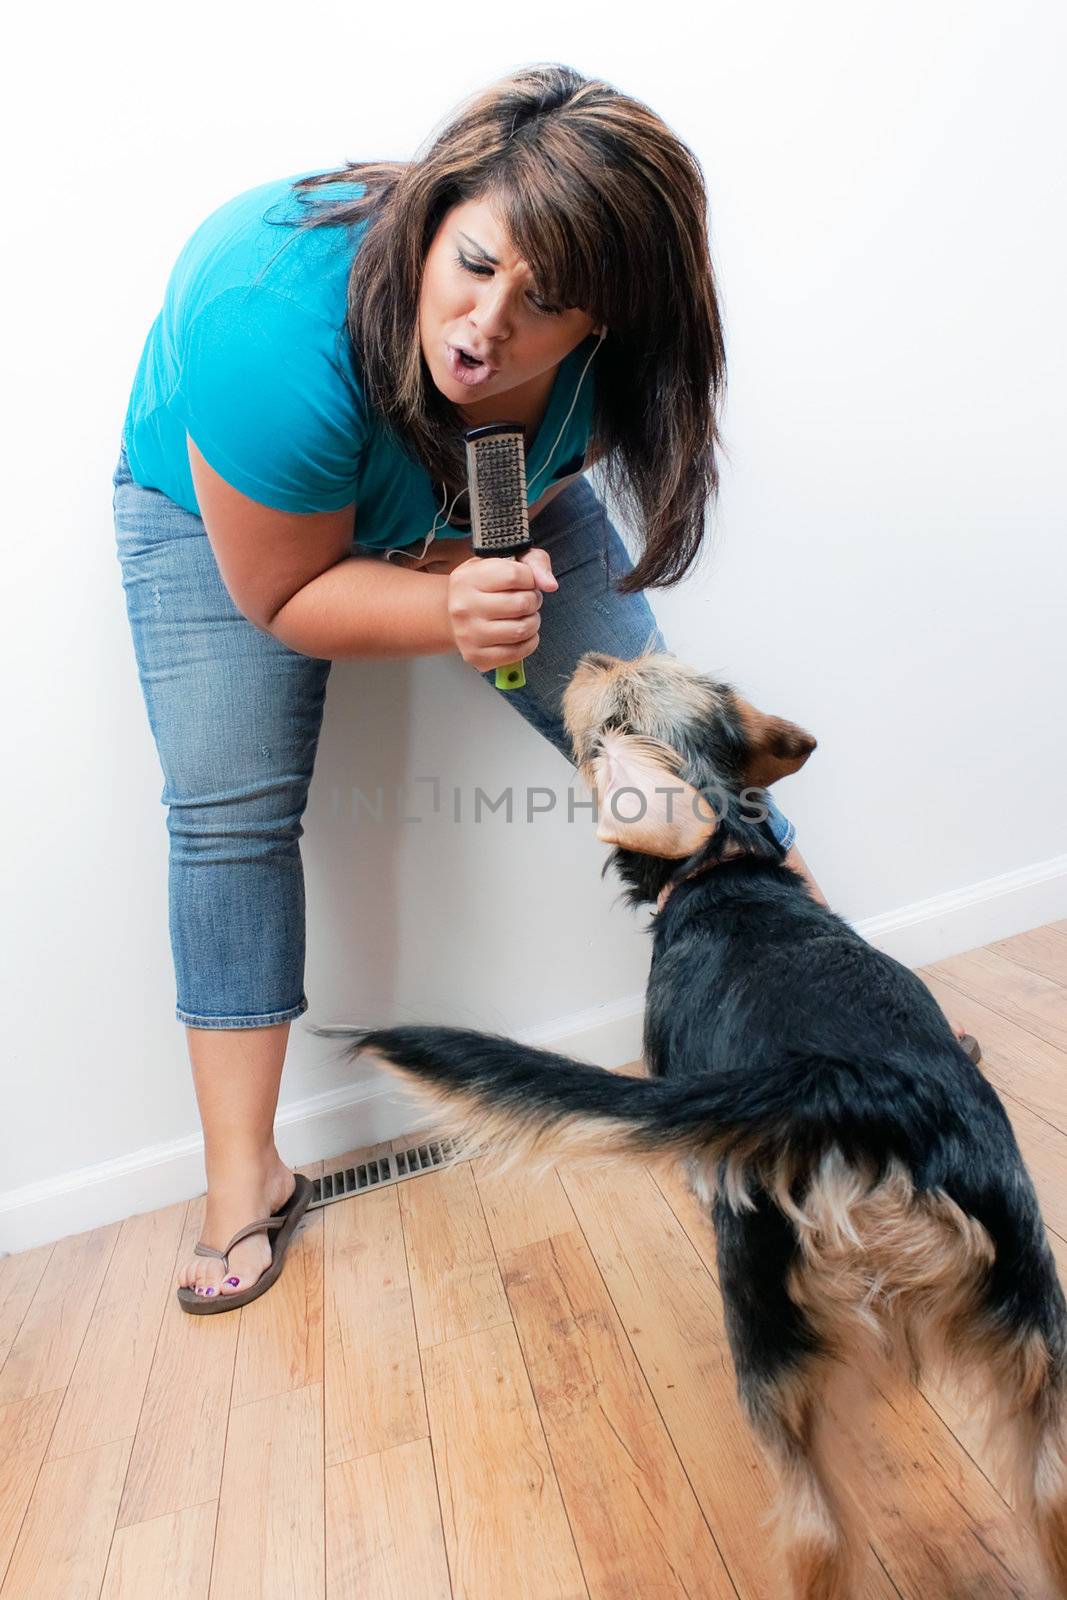 A Hispanic woman singing on a pretend microphone that is actually a hair brush to the dog while listening to music playing through her stereo earbud headphones. 